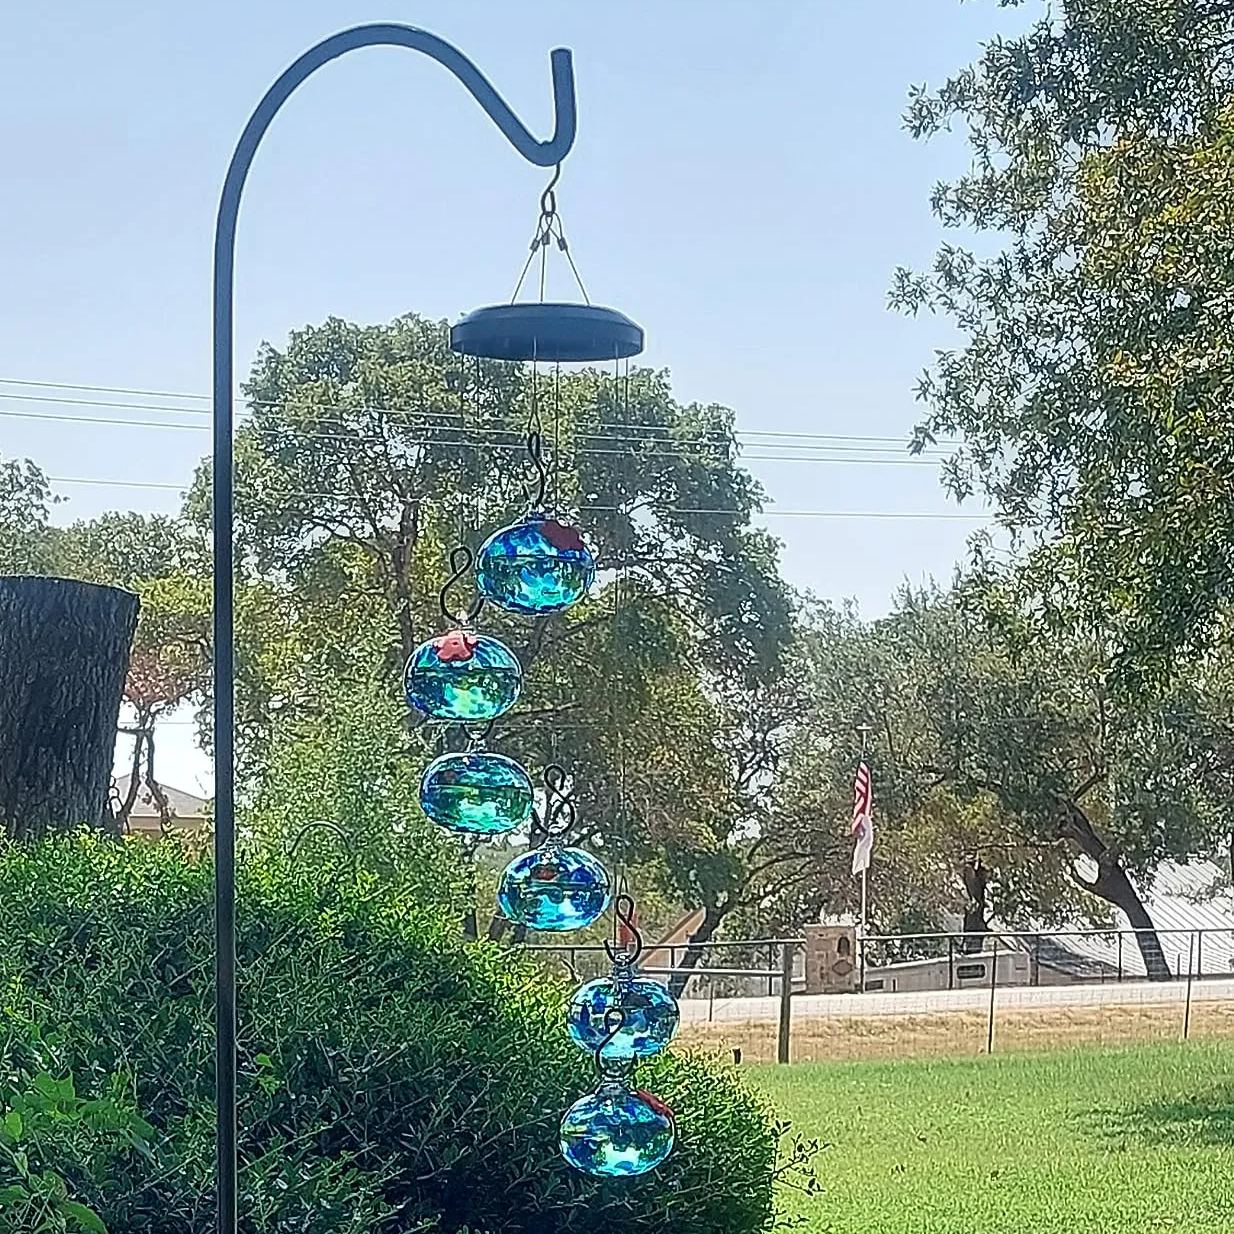 🎉Spring Sale🎉Charming Wind Chimes Hummingbird feeders❤️BUY 2 FREE SHIPPING&SAVE 10%